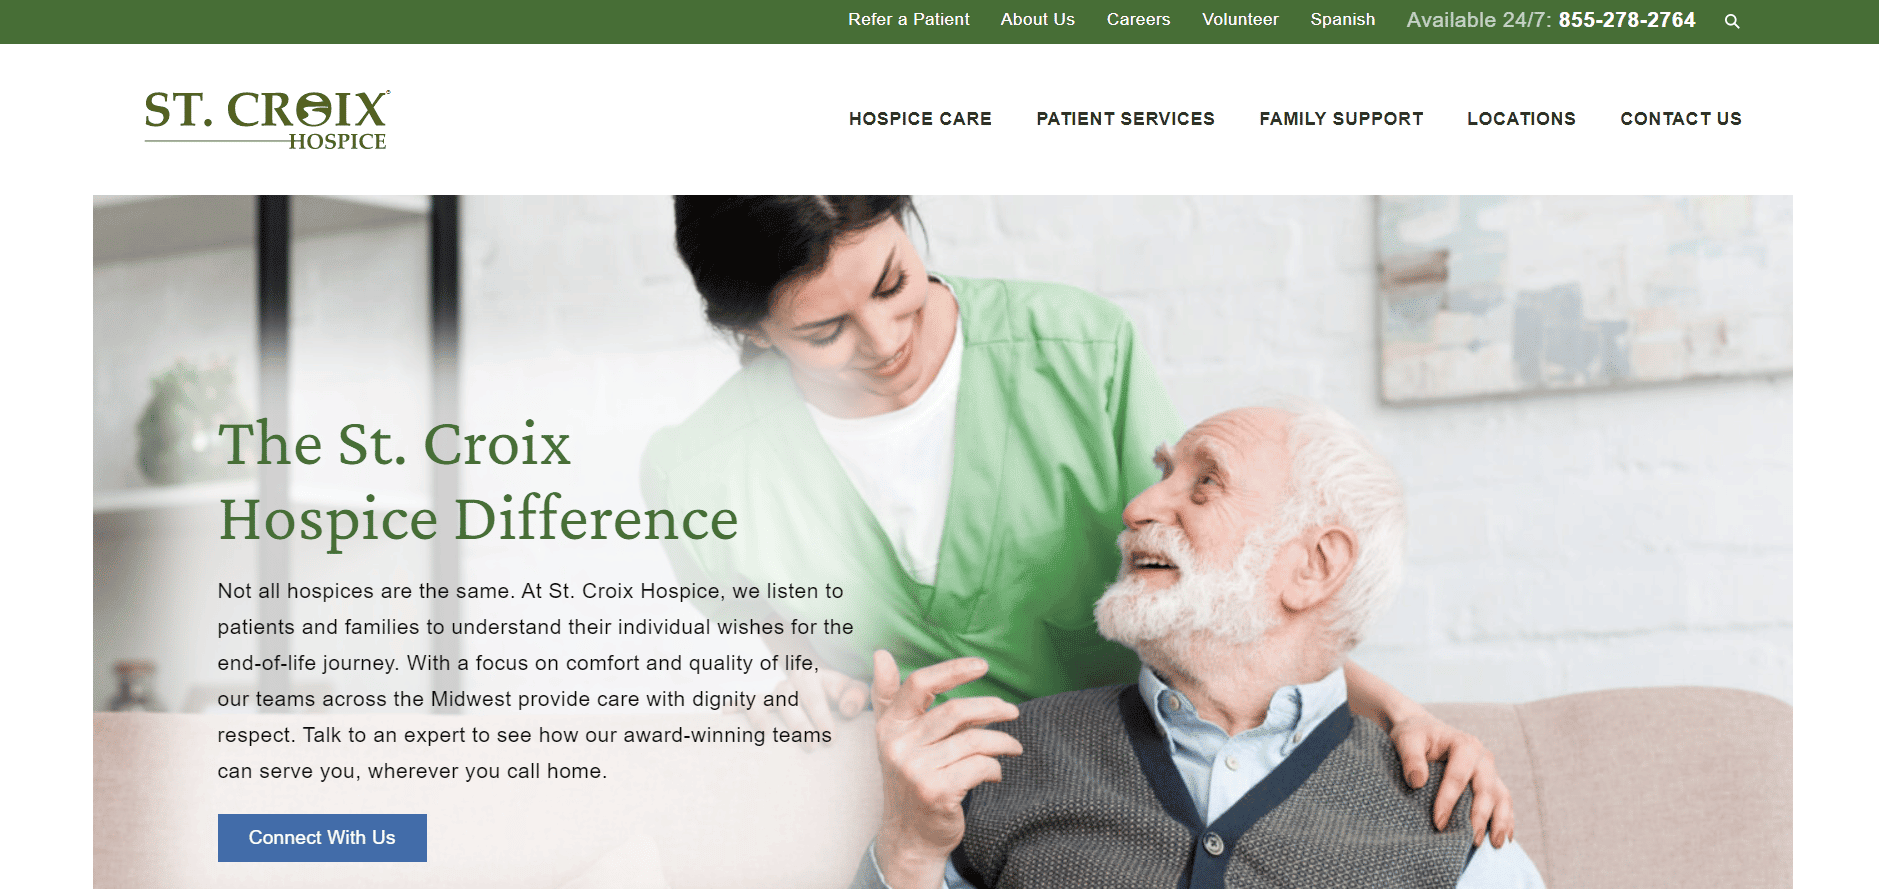 St. Croix Hospice | Part-Time Jobs with Health Insurance Benefits